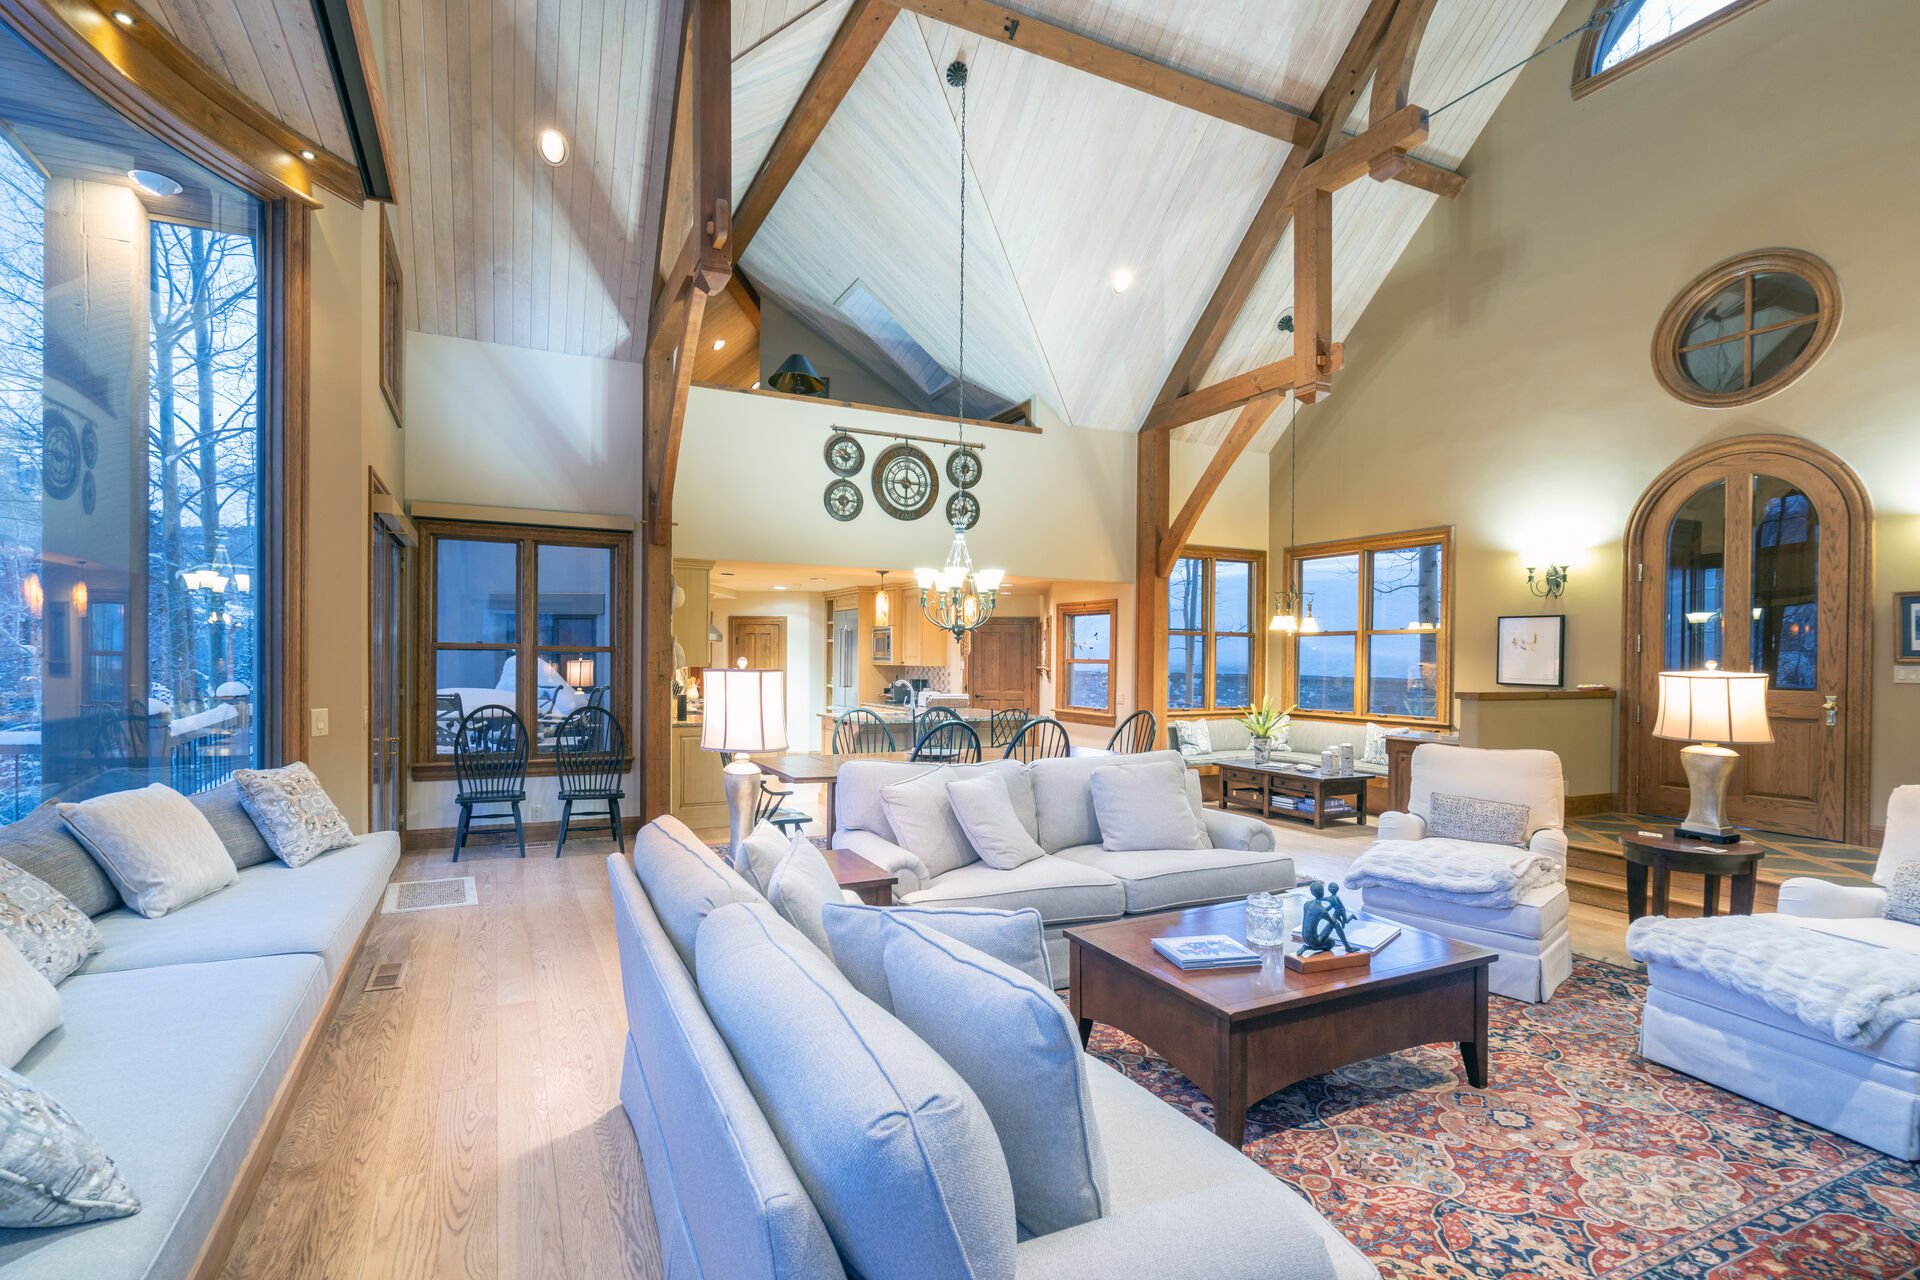 Multiple couches and armchairs in the living area of this Telluride golf rental, with a coffee table in the center.